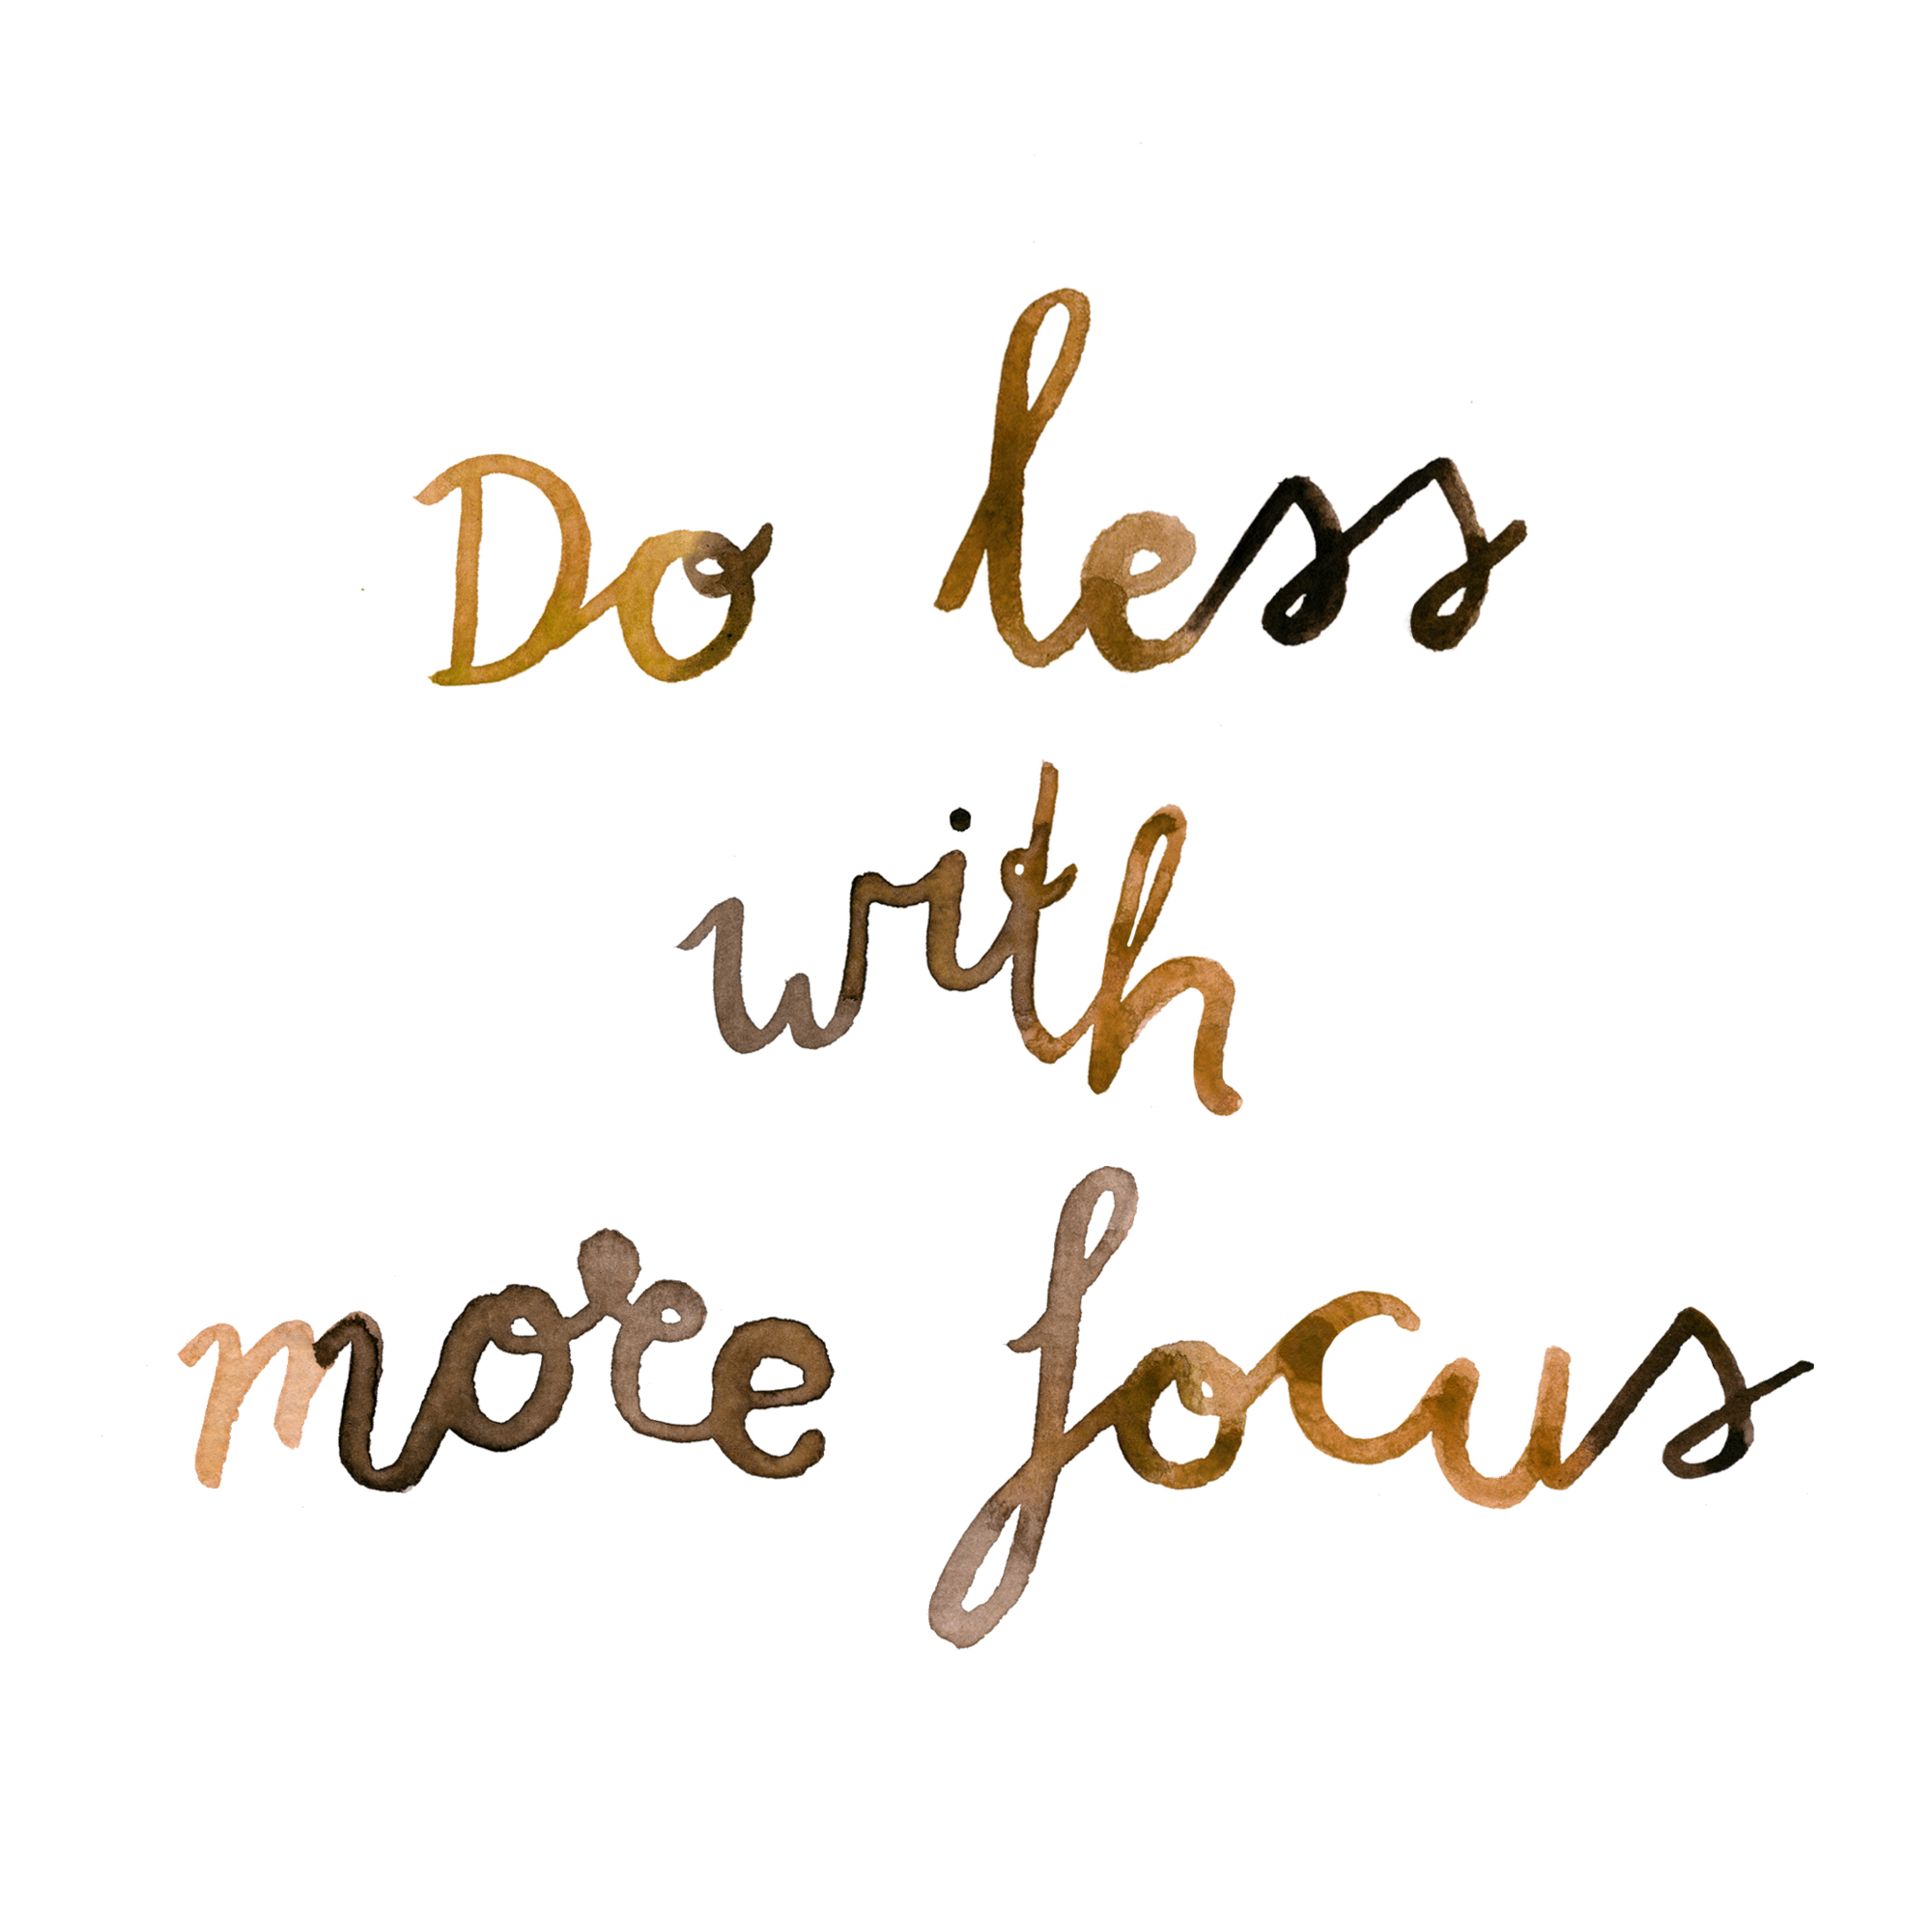 Do less with more focus